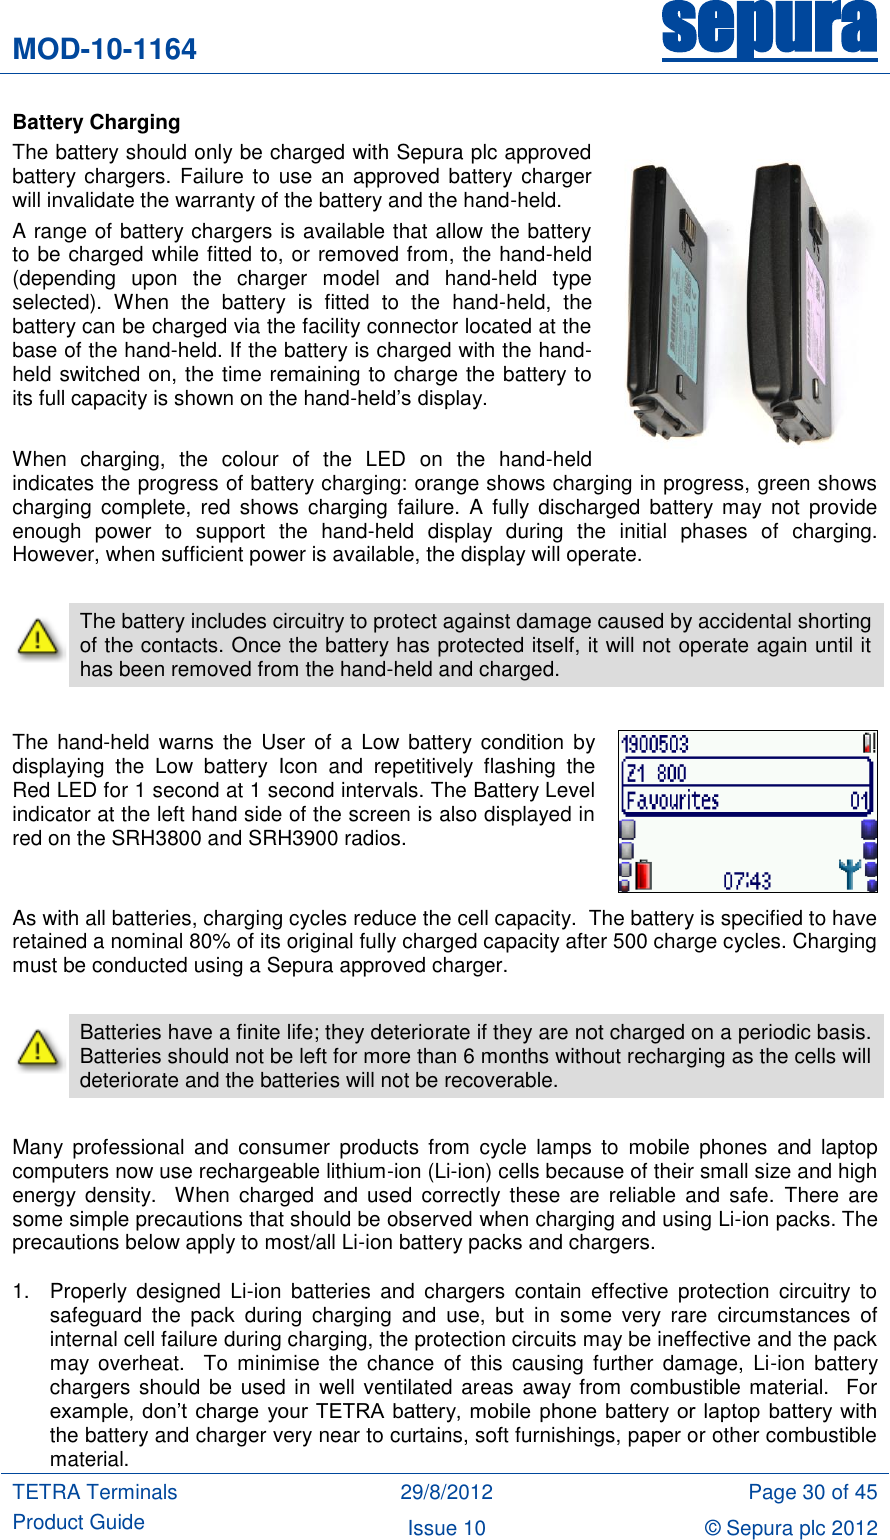 MOD-10-1164 sepura  TETRA Terminals Product Guide 29/8/2012 Page 30 of 45 Issue 10 © Sepura plc 2012   Battery Charging The battery should only be charged with Sepura plc approved battery chargers.  Failure  to use  an approved  battery charger will invalidate the warranty of the battery and the hand-held. A range of battery chargers is available that allow the battery to be charged while fitted to, or removed from, the hand-held (depending  upon  the  charger  model  and  hand-held  type selected).  When  the  battery  is  fitted  to  the  hand-held,  the battery can be charged via the facility connector located at the base of the hand-held. If the battery is charged with the hand-held switched on, the time remaining to charge the battery to its full capacity is shown on the hand-held‟s display.  When  charging,  the  colour  of  the  LED  on  the  hand-held indicates the progress of battery charging: orange shows charging in progress, green shows charging  complete,  red  shows charging  failure.  A  fully  discharged  battery may  not  provide enough  power  to  support  the  hand-held  display  during  the  initial  phases  of  charging. However, when sufficient power is available, the display will operate.   The battery includes circuitry to protect against damage caused by accidental shorting of the contacts. Once the battery has protected itself, it will not operate again until it has been removed from the hand-held and charged.  The  hand-held  warns the  User  of  a Low  battery  condition by displaying  the  Low  battery  Icon  and  repetitively  flashing  the Red LED for 1 second at 1 second intervals. The Battery Level indicator at the left hand side of the screen is also displayed in red on the SRH3800 and SRH3900 radios.  As with all batteries, charging cycles reduce the cell capacity.  The battery is specified to have retained a nominal 80% of its original fully charged capacity after 500 charge cycles. Charging must be conducted using a Sepura approved charger.   Batteries have a finite life; they deteriorate if they are not charged on a periodic basis.  Batteries should not be left for more than 6 months without recharging as the cells will deteriorate and the batteries will not be recoverable.  Many  professional  and  consumer  products  from  cycle  lamps  to  mobile  phones  and  laptop computers now use rechargeable lithium-ion (Li-ion) cells because of their small size and high energy  density.    When  charged  and  used  correctly  these are  reliable and  safe.  There  are some simple precautions that should be observed when charging and using Li-ion packs. The precautions below apply to most/all Li-ion battery packs and chargers. 1.  Properly  designed  Li-ion  batteries  and  chargers  contain  effective  protection  circuitry  to safeguard  the  pack  during  charging  and  use,  but  in  some  very  rare  circumstances  of internal cell failure during charging, the protection circuits may be ineffective and the pack may  overheat.    To  minimise  the  chance  of  this  causing  further  damage,  Li-ion  battery chargers should be used in well ventilated areas away from combustible material.  For example,  don‟t  charge  your  TETRA battery, mobile  phone  battery or laptop  battery with the battery and charger very near to curtains, soft furnishings, paper or other combustible material. 